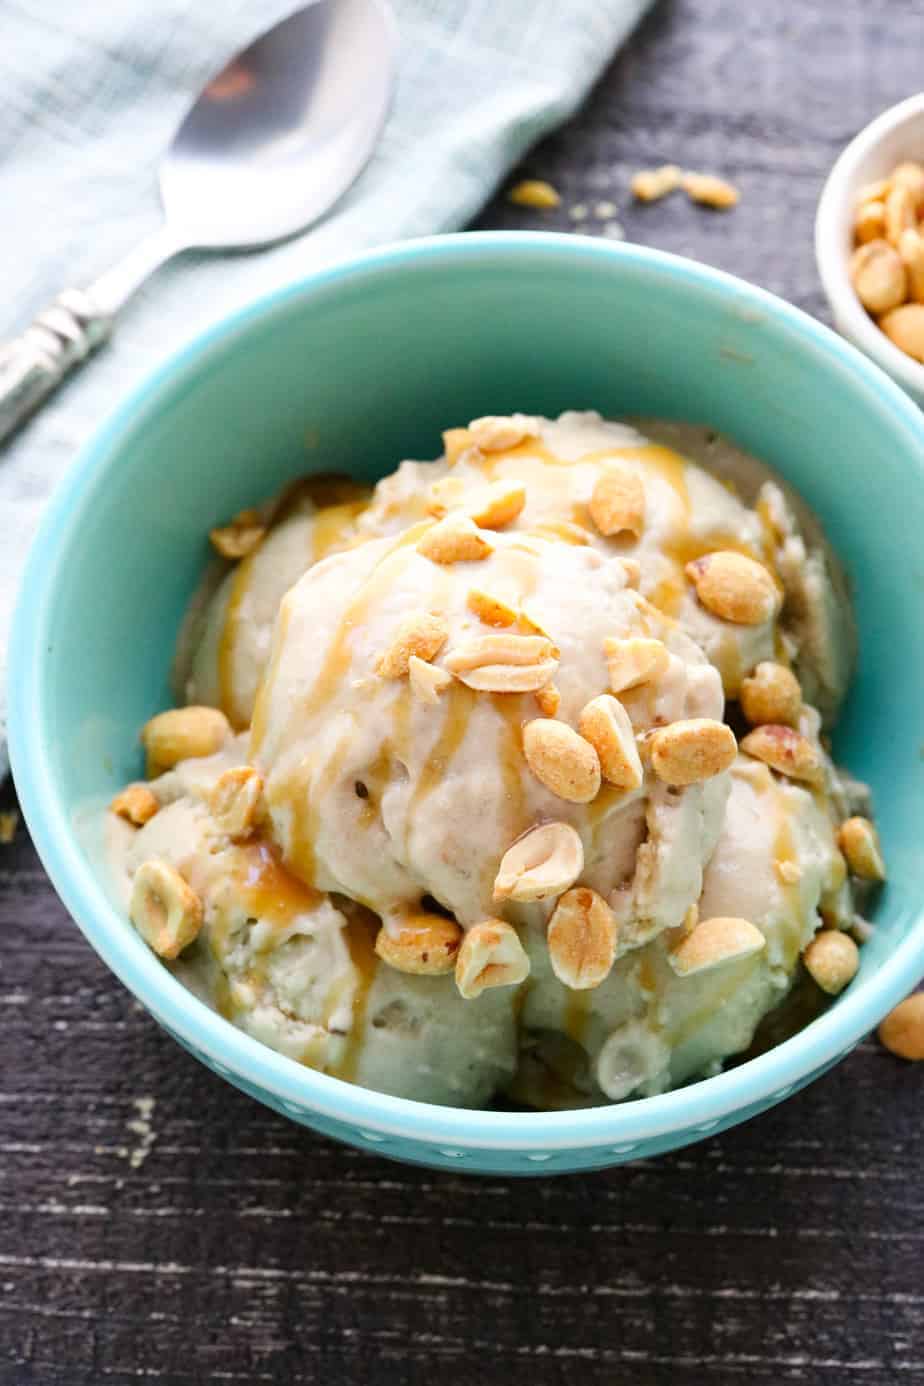 https://pinchmegood.com/wp-content/uploads/2019/03/healthy-banana-ice-cream-with-peanuts-in-a-bowl.jpg